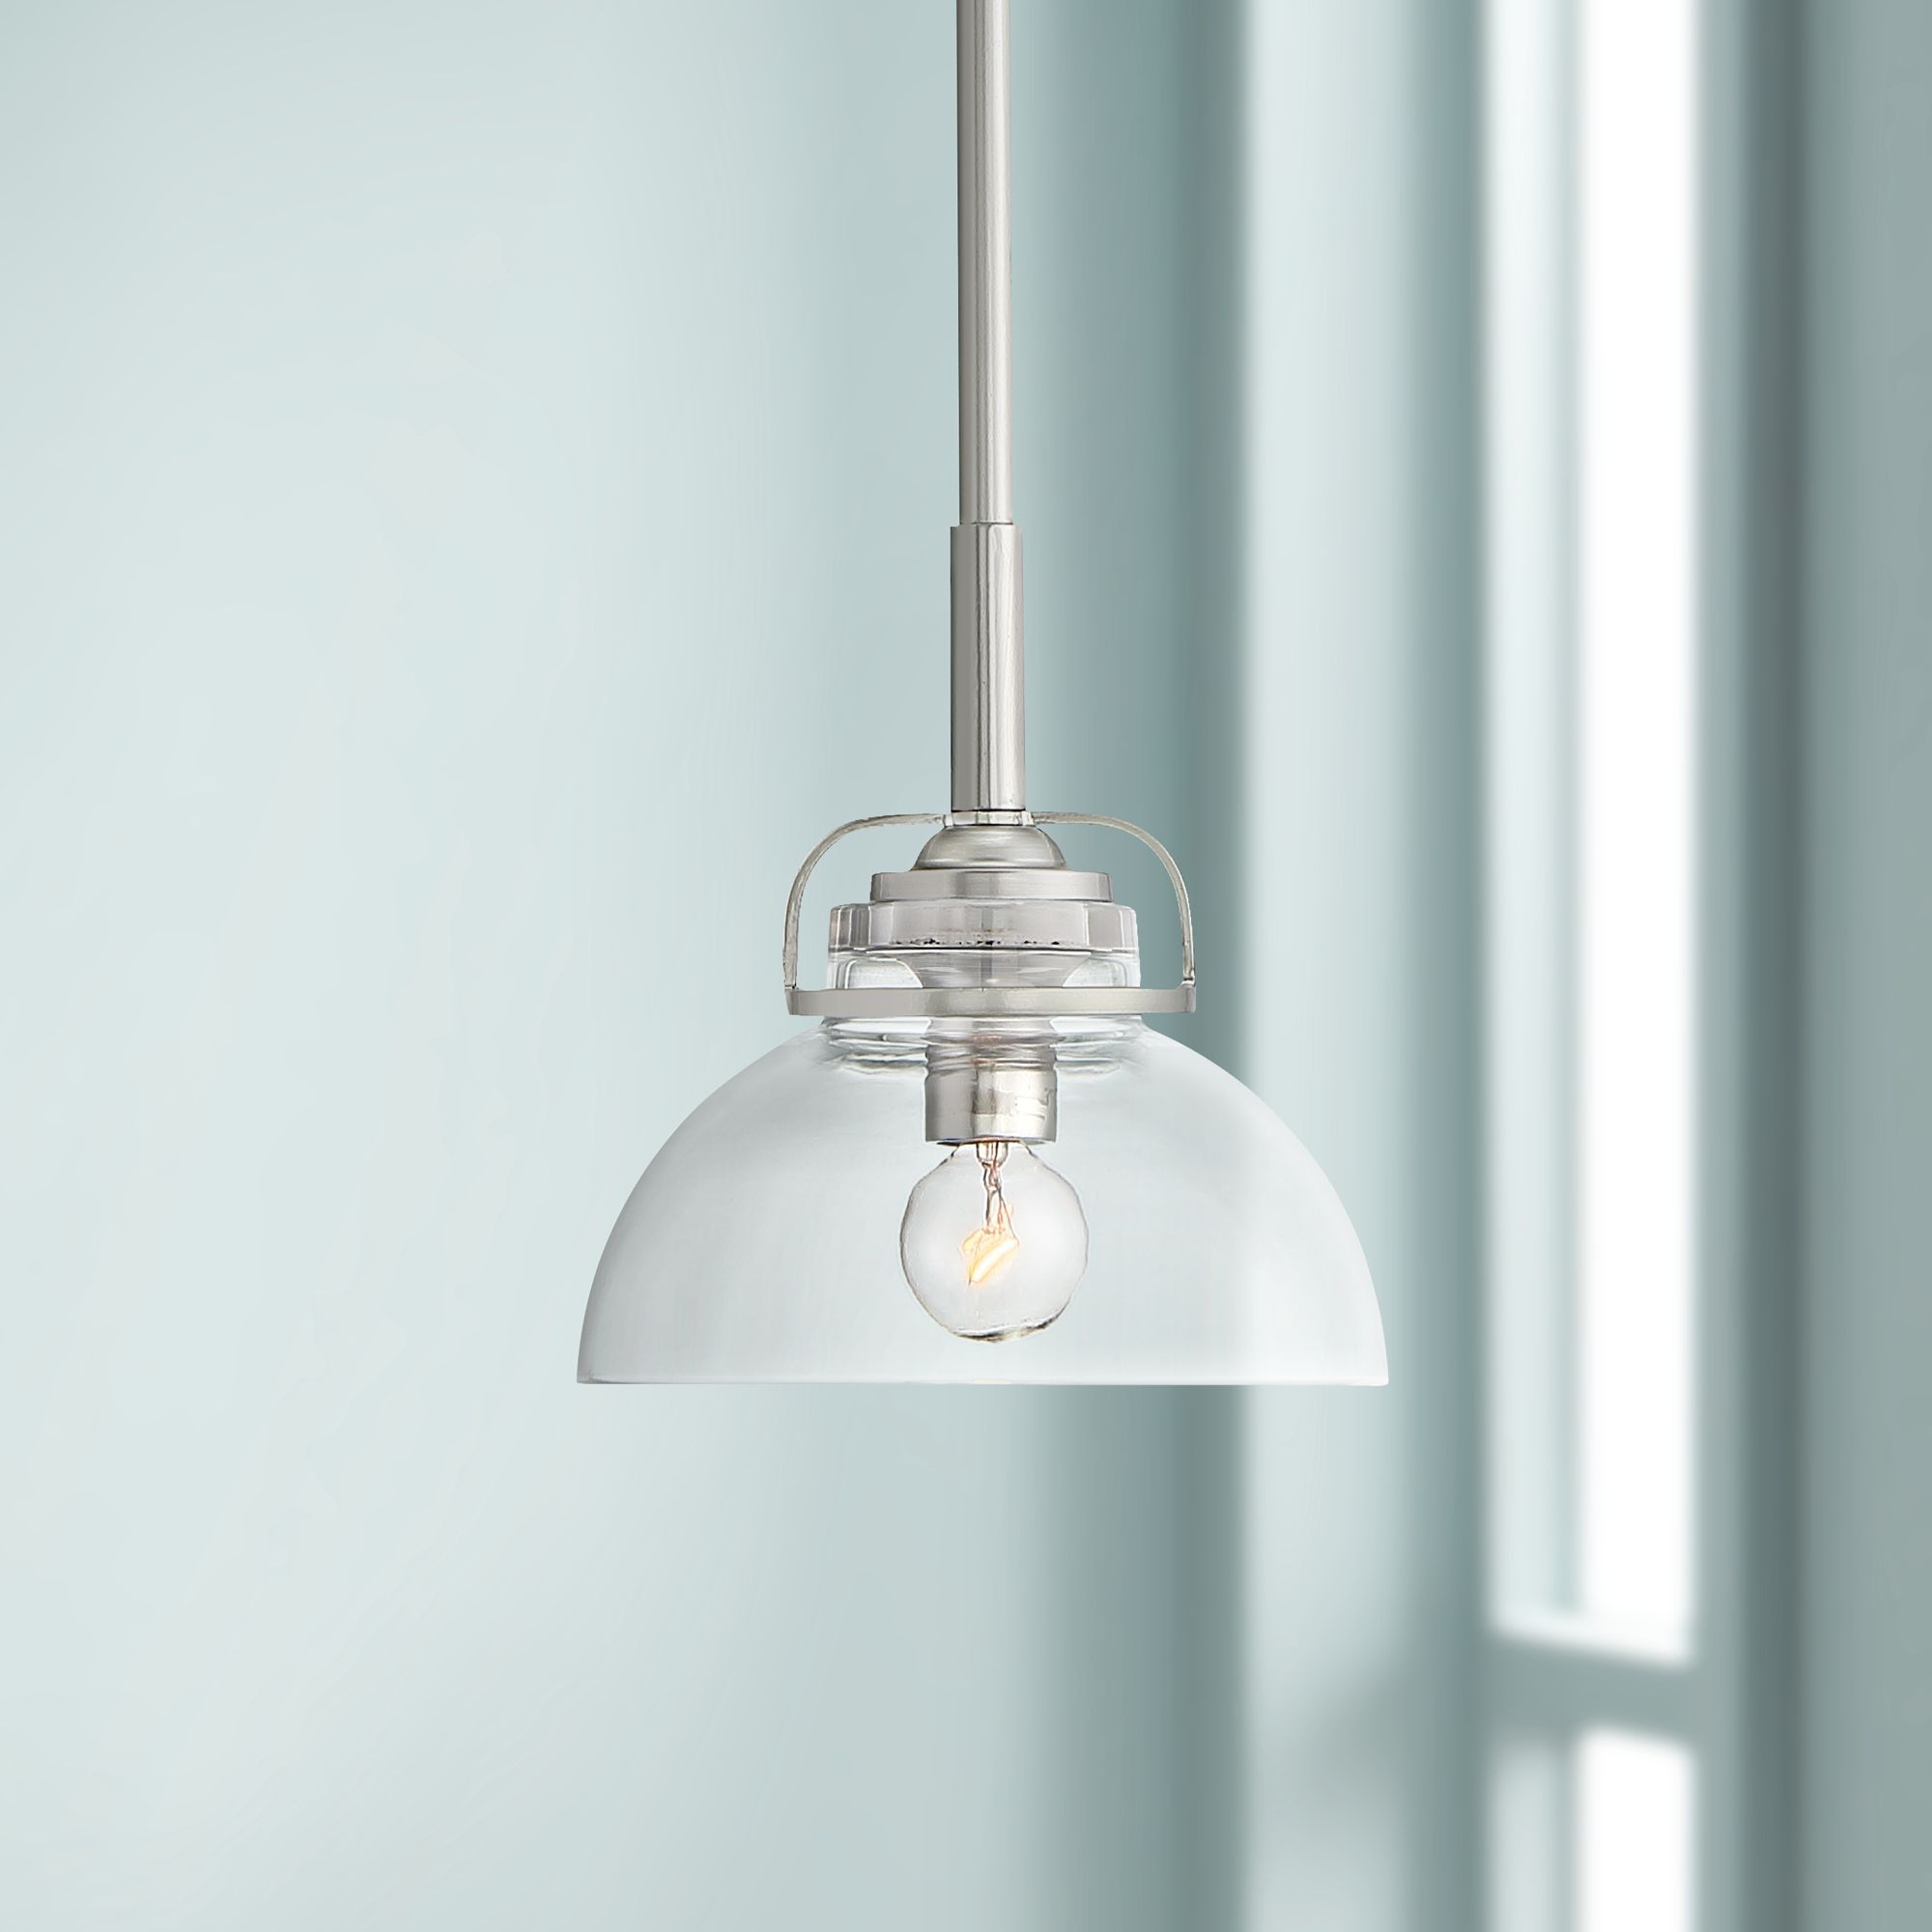 Possini Euro Design Brushed Nickel Mini Pendant Light 6 1 Intended For Gray And Nickel Kitchen Island Light Pendants Lights (View 10 of 15)